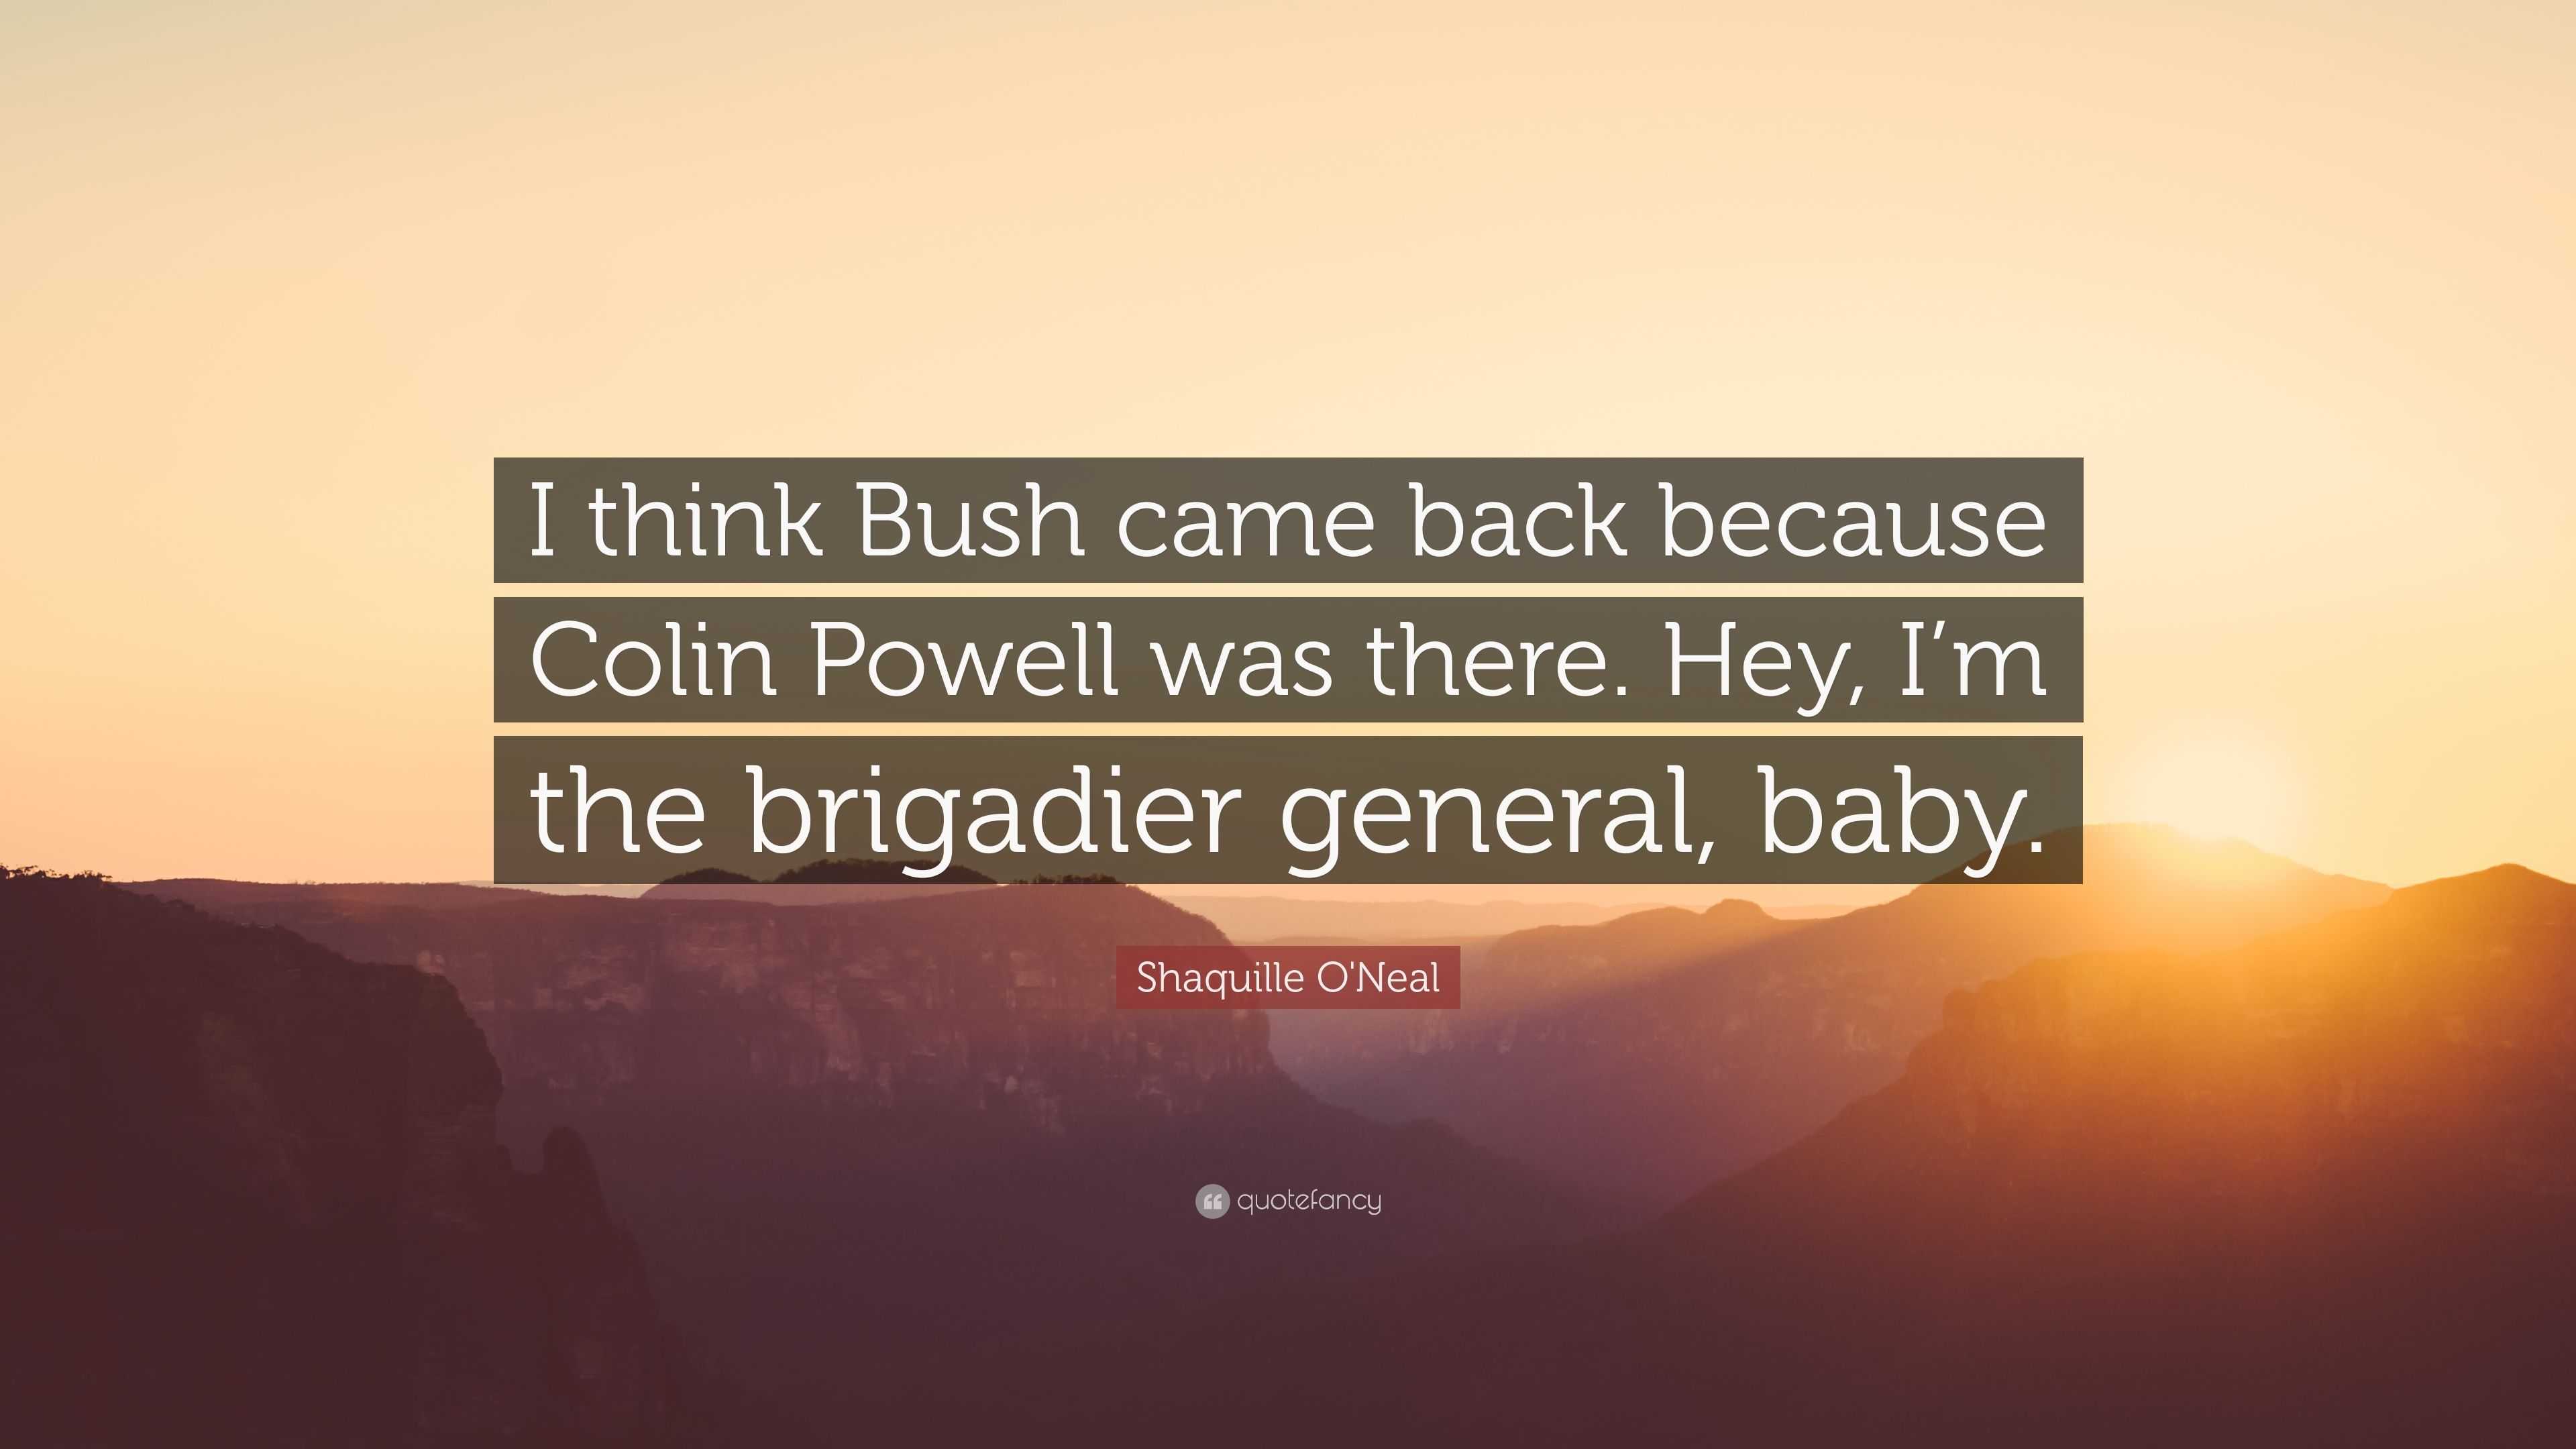 Shaquille O'Neal Quote: "I think Bush came back because ...